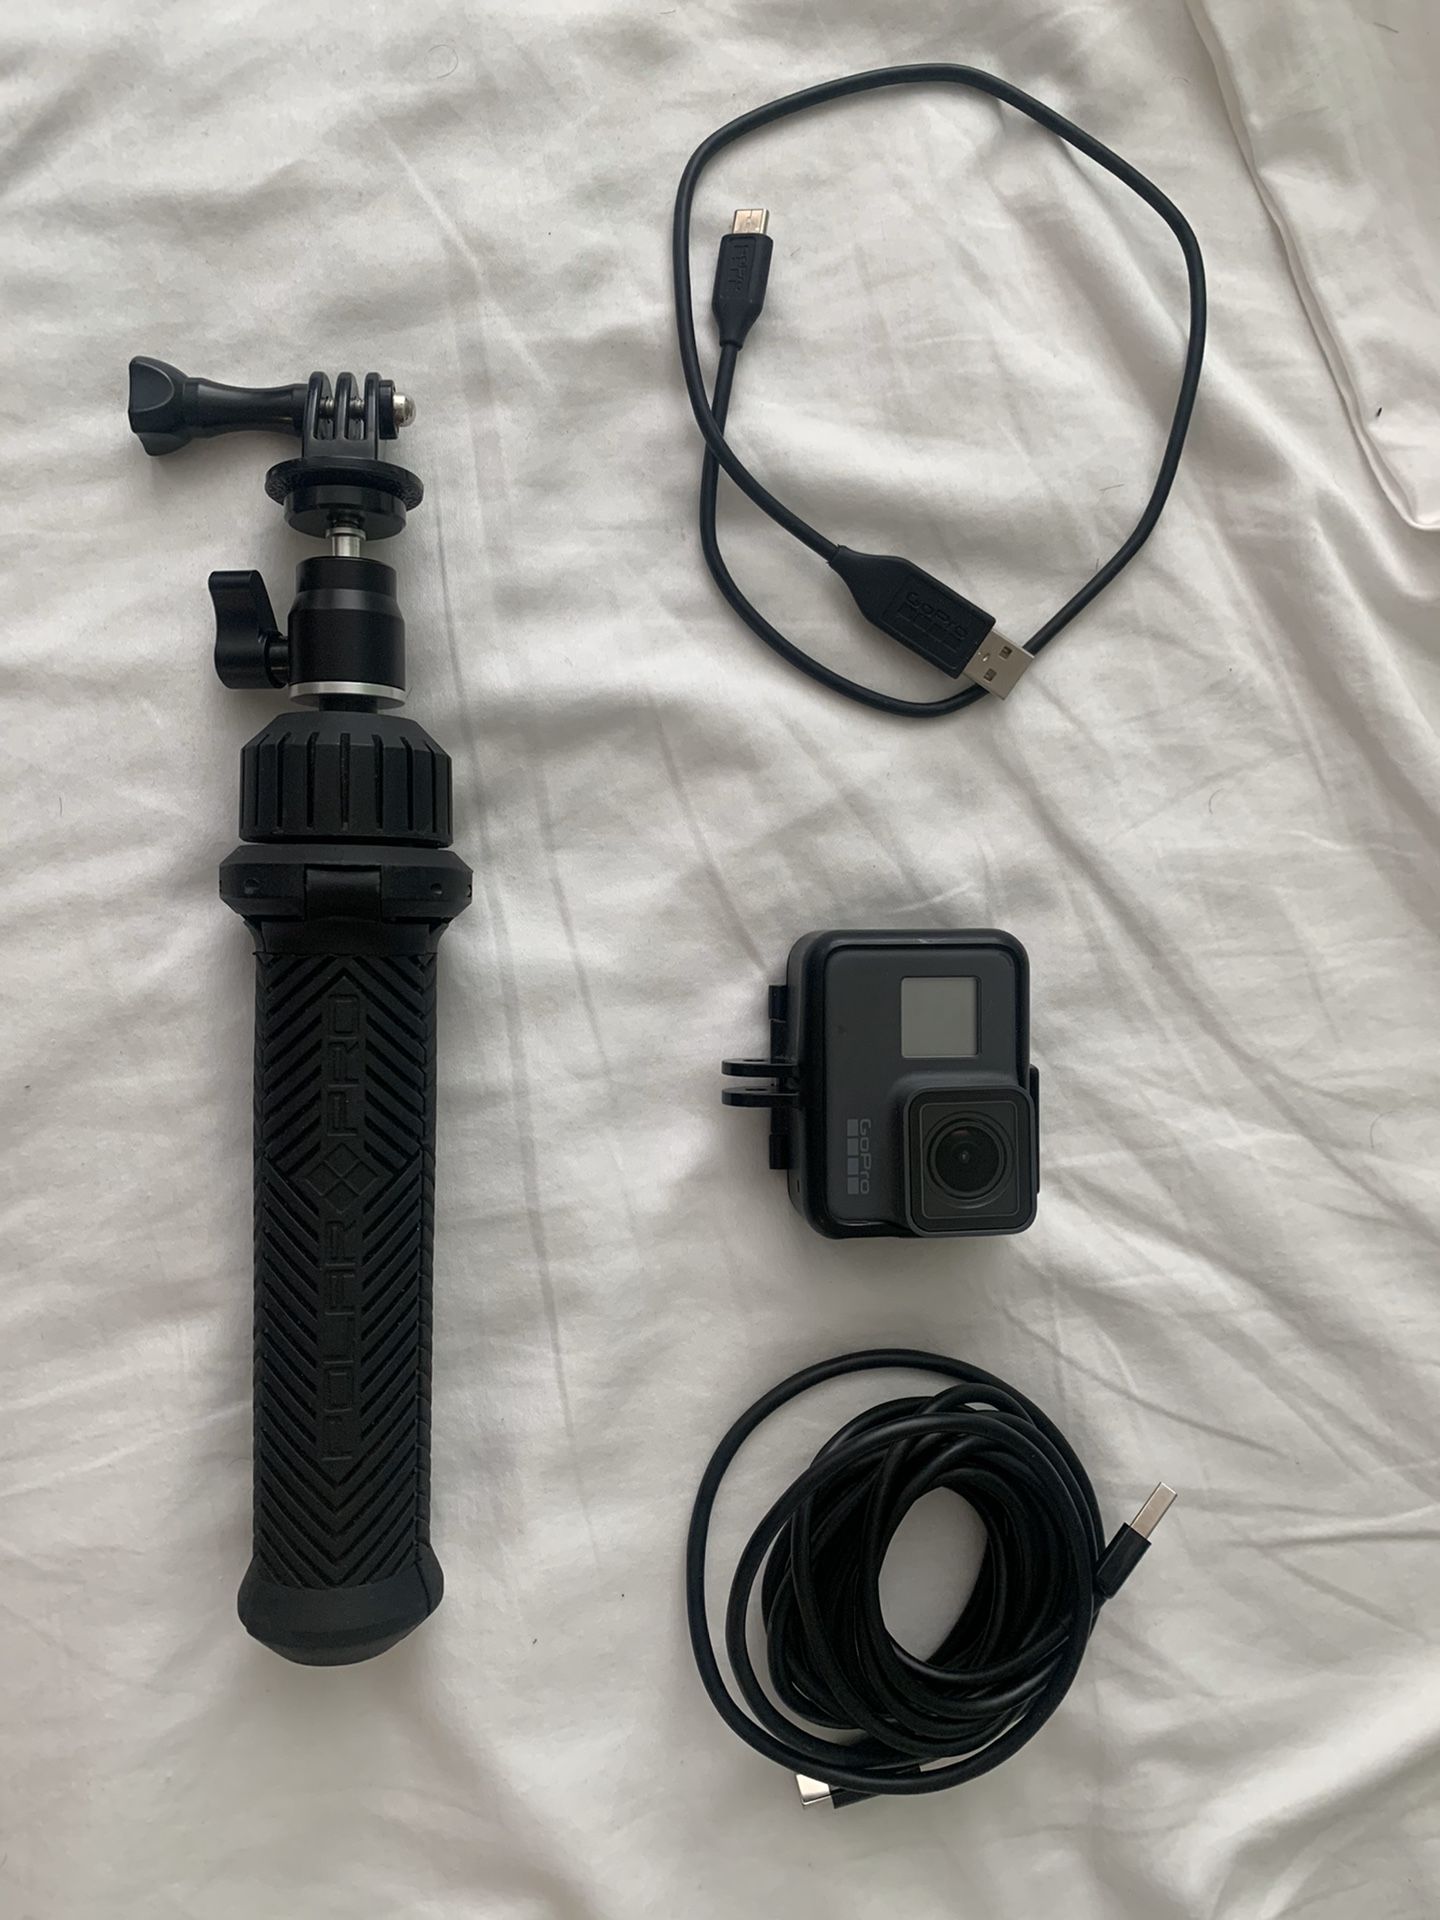 GoPro hero 5 black w/ suction cup mount and SD card